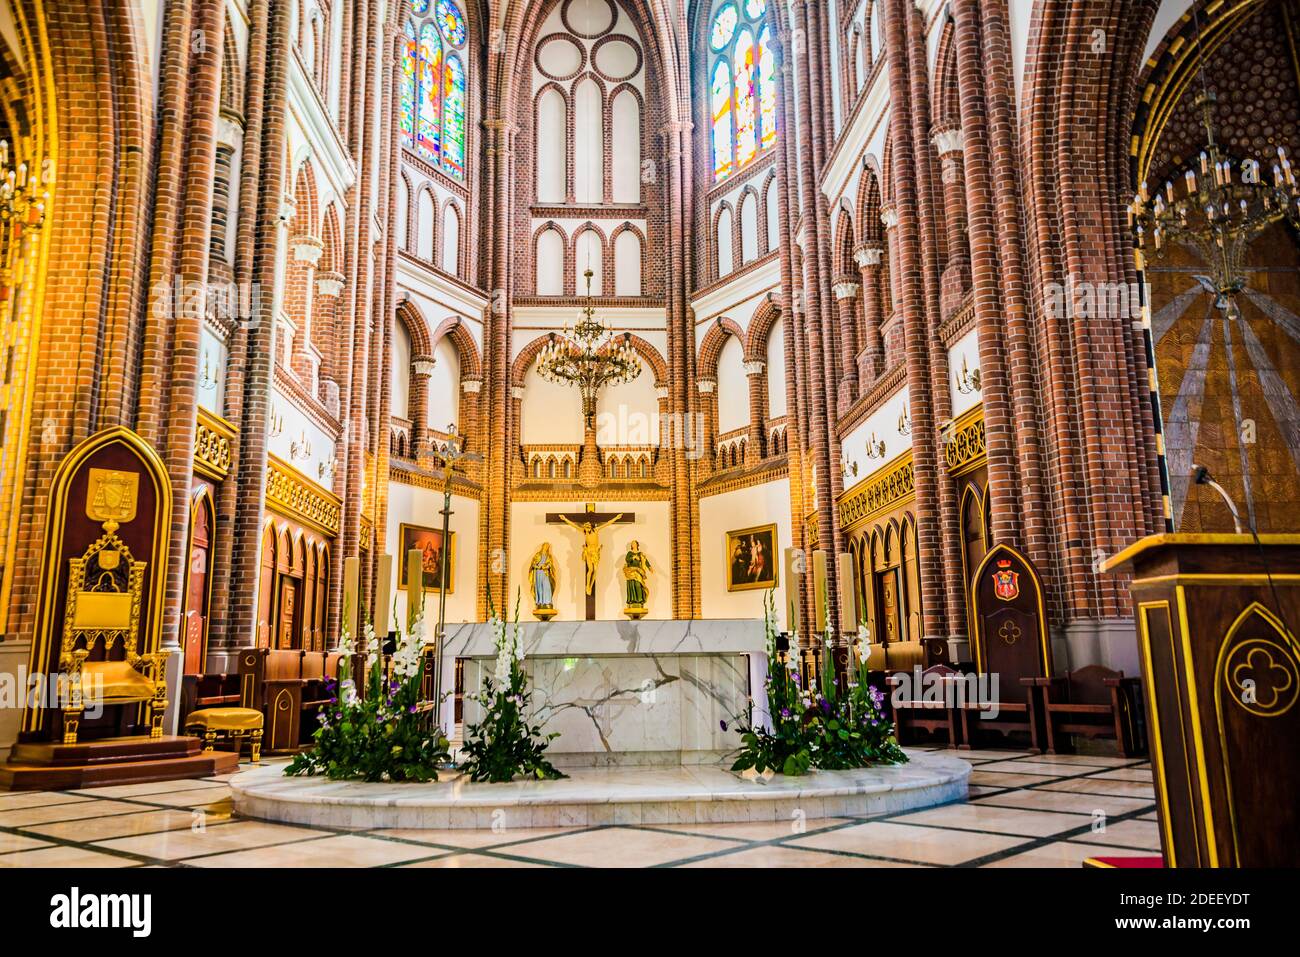 Main nave and main altar. St. Florian's Cathedral, or Cathedral of St. Michael the Archangel and St. Florian the Martyr. Warsaw,Poland,Europe Stock Photo